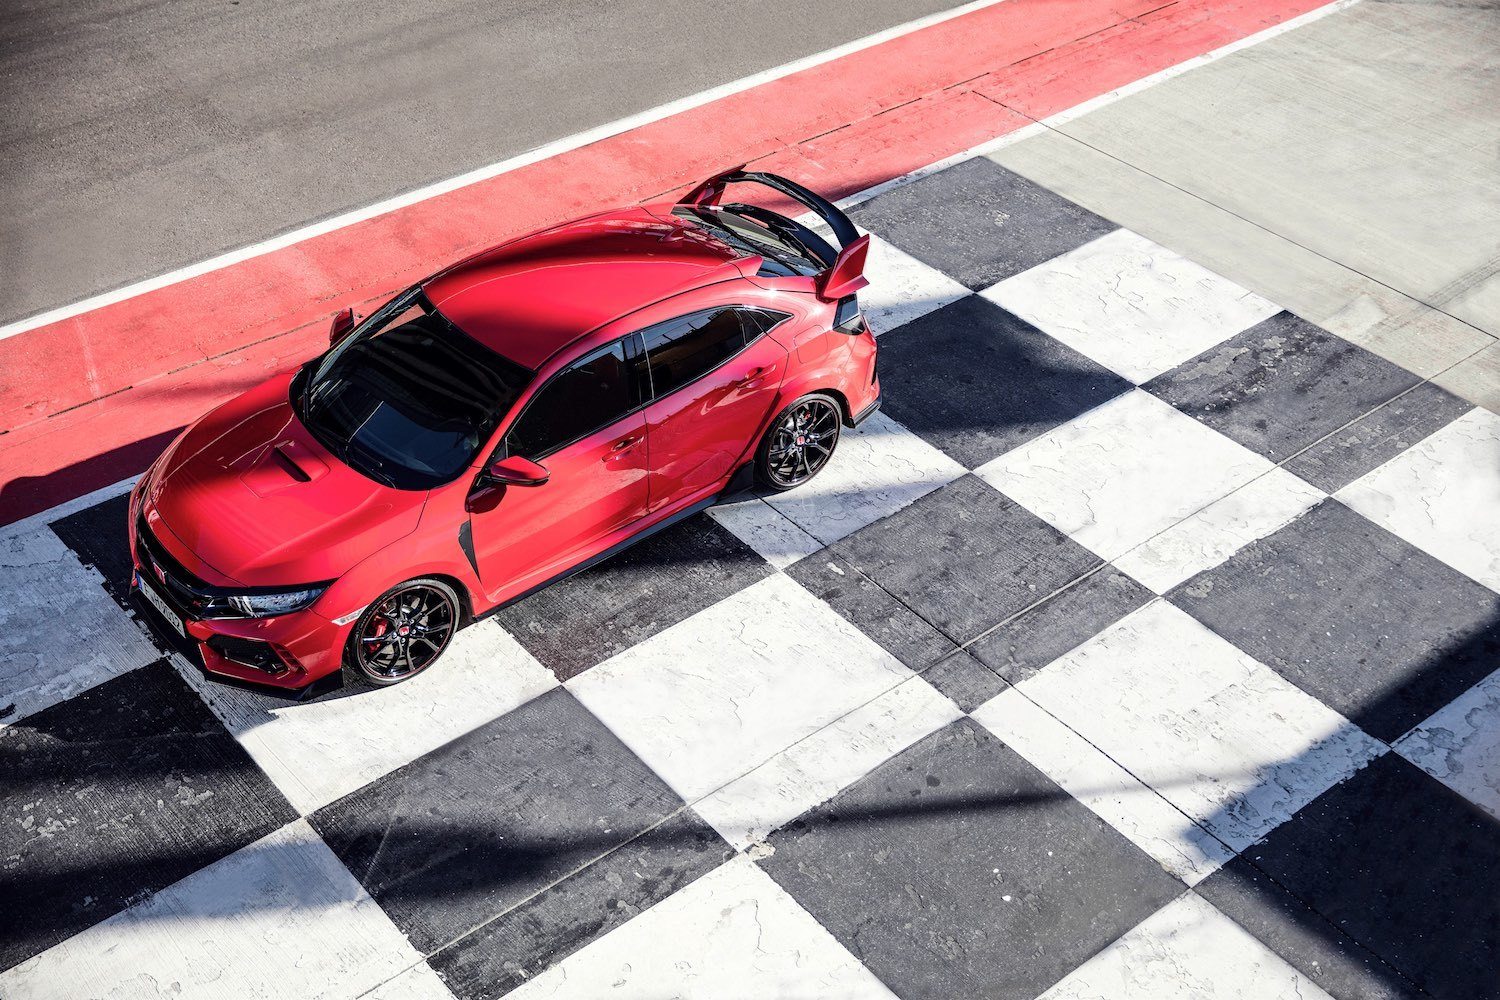 Tim Barnes-Clay reviews the 2018 Honda Civic Type R at the first drives 19